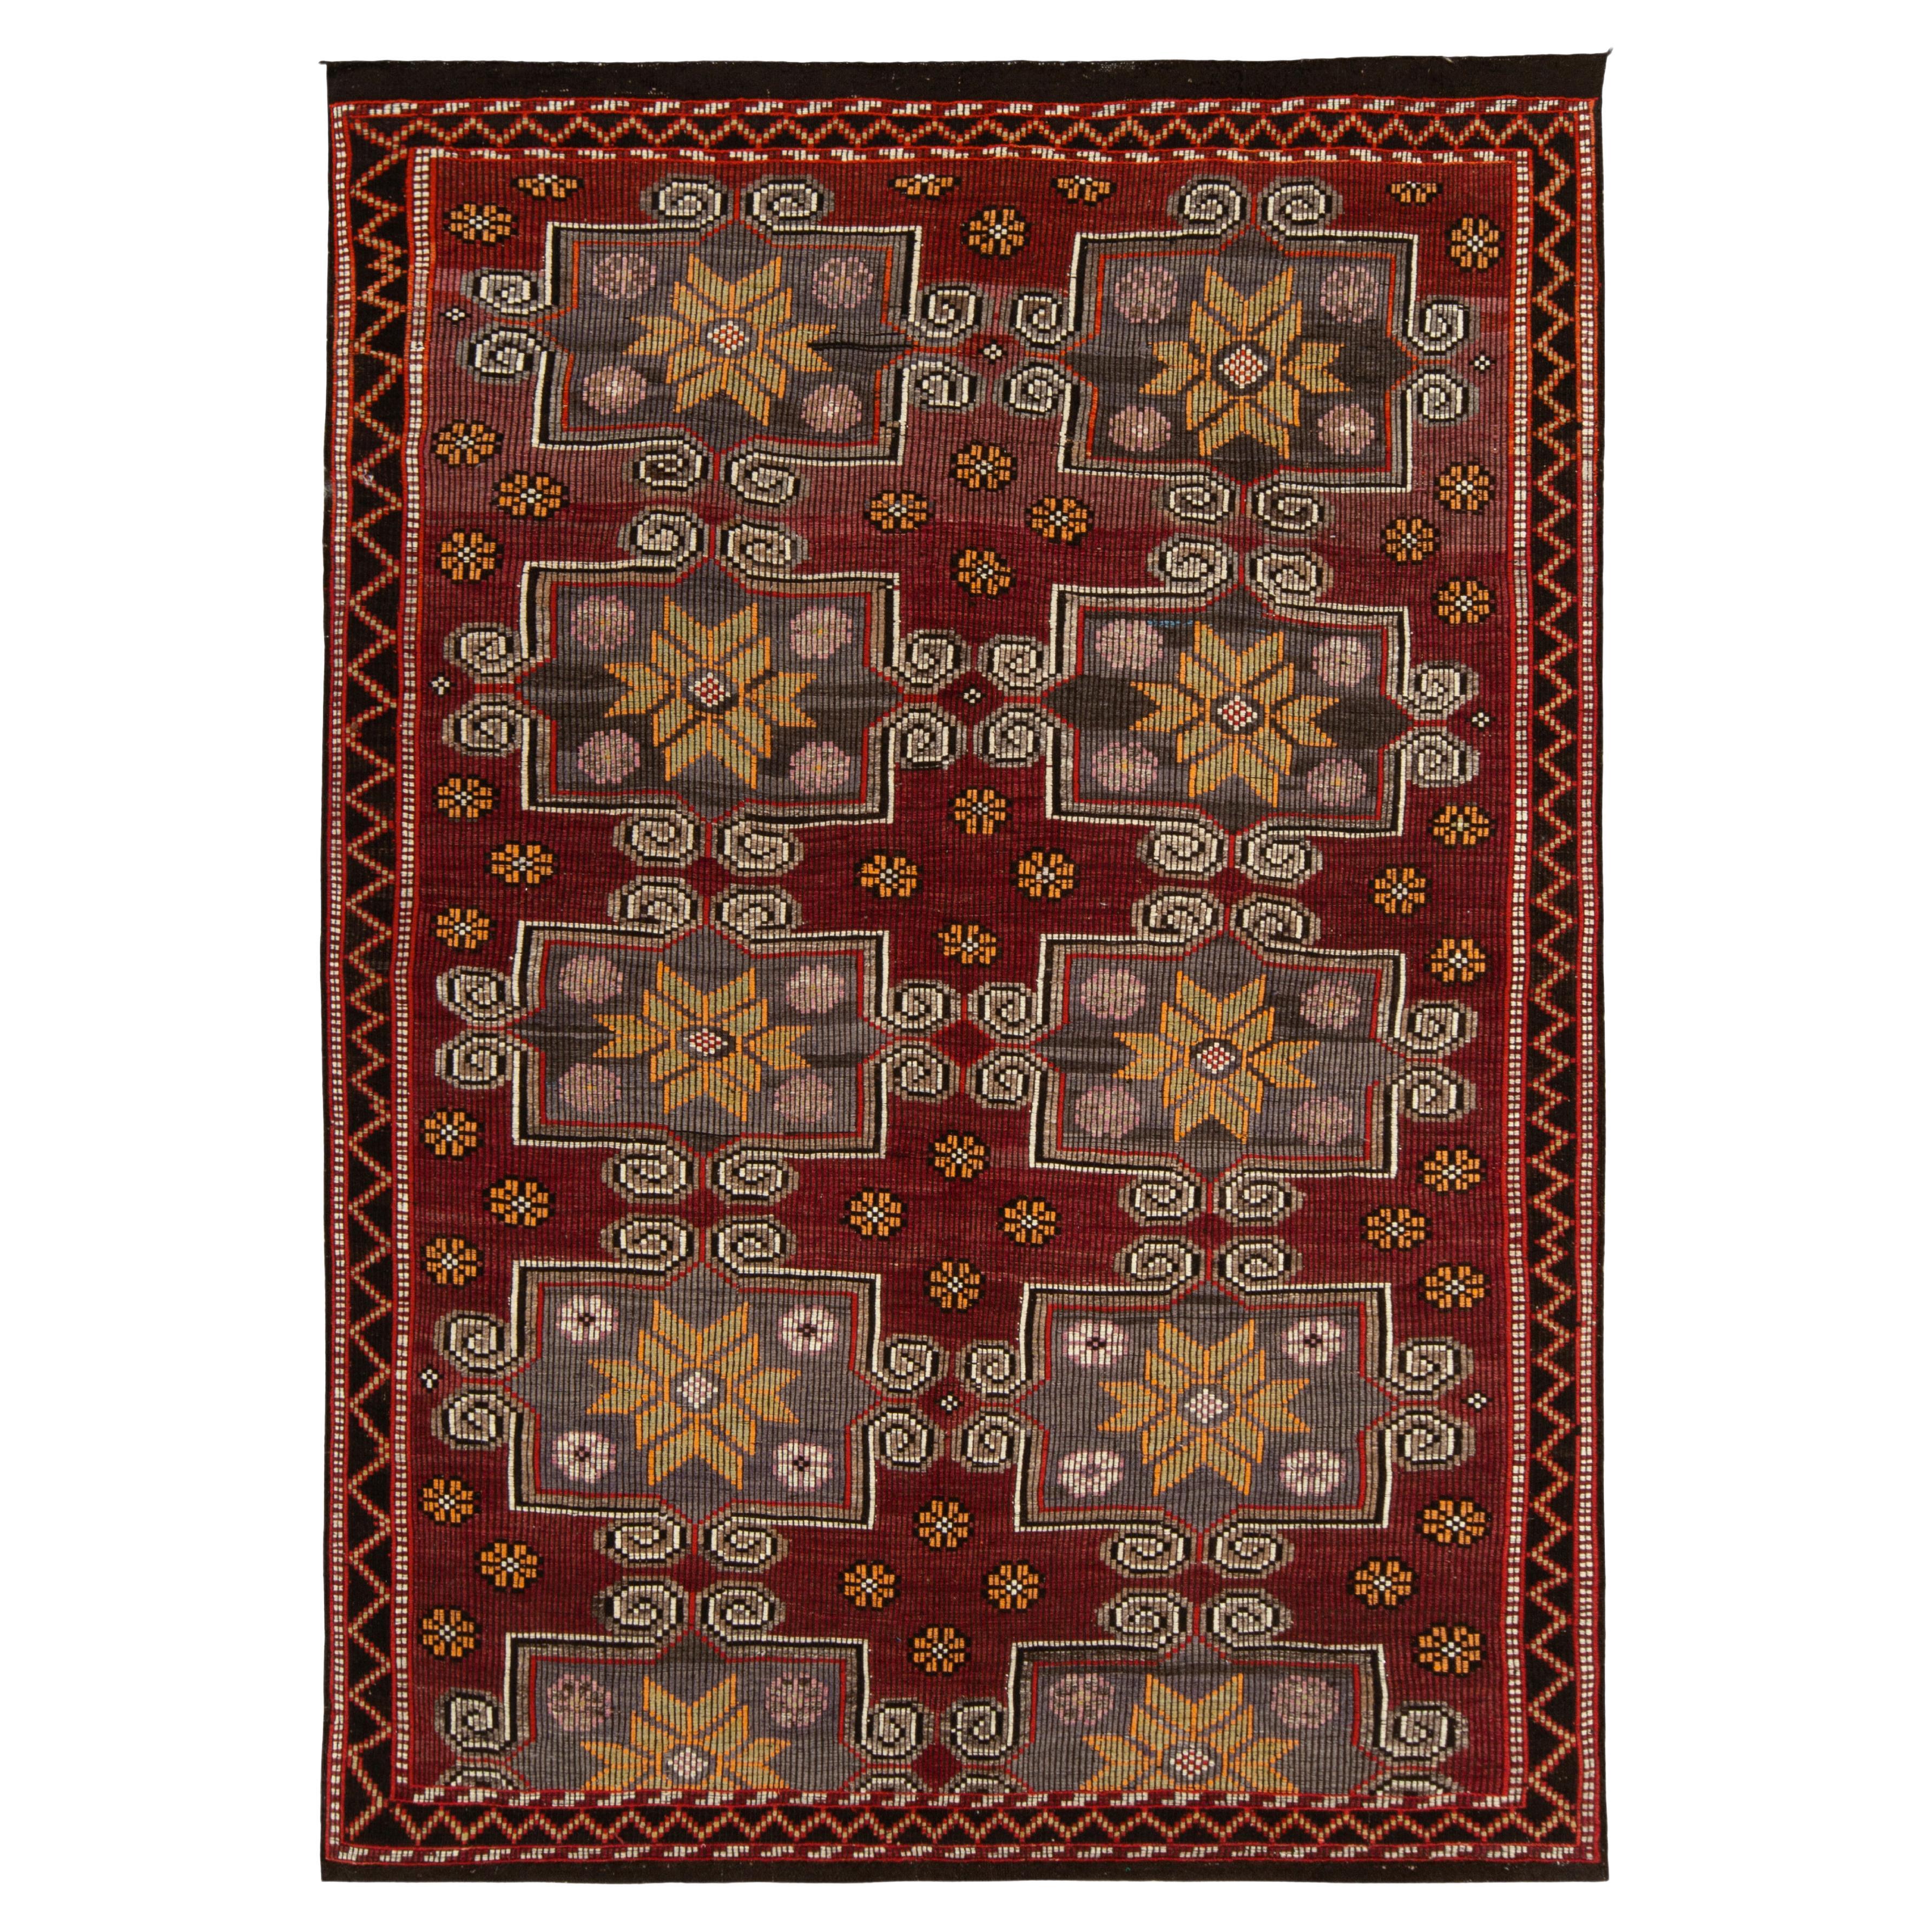 Vintage Turkish Rugs and Carpets - 14,860 For Sale at 1stdibs 